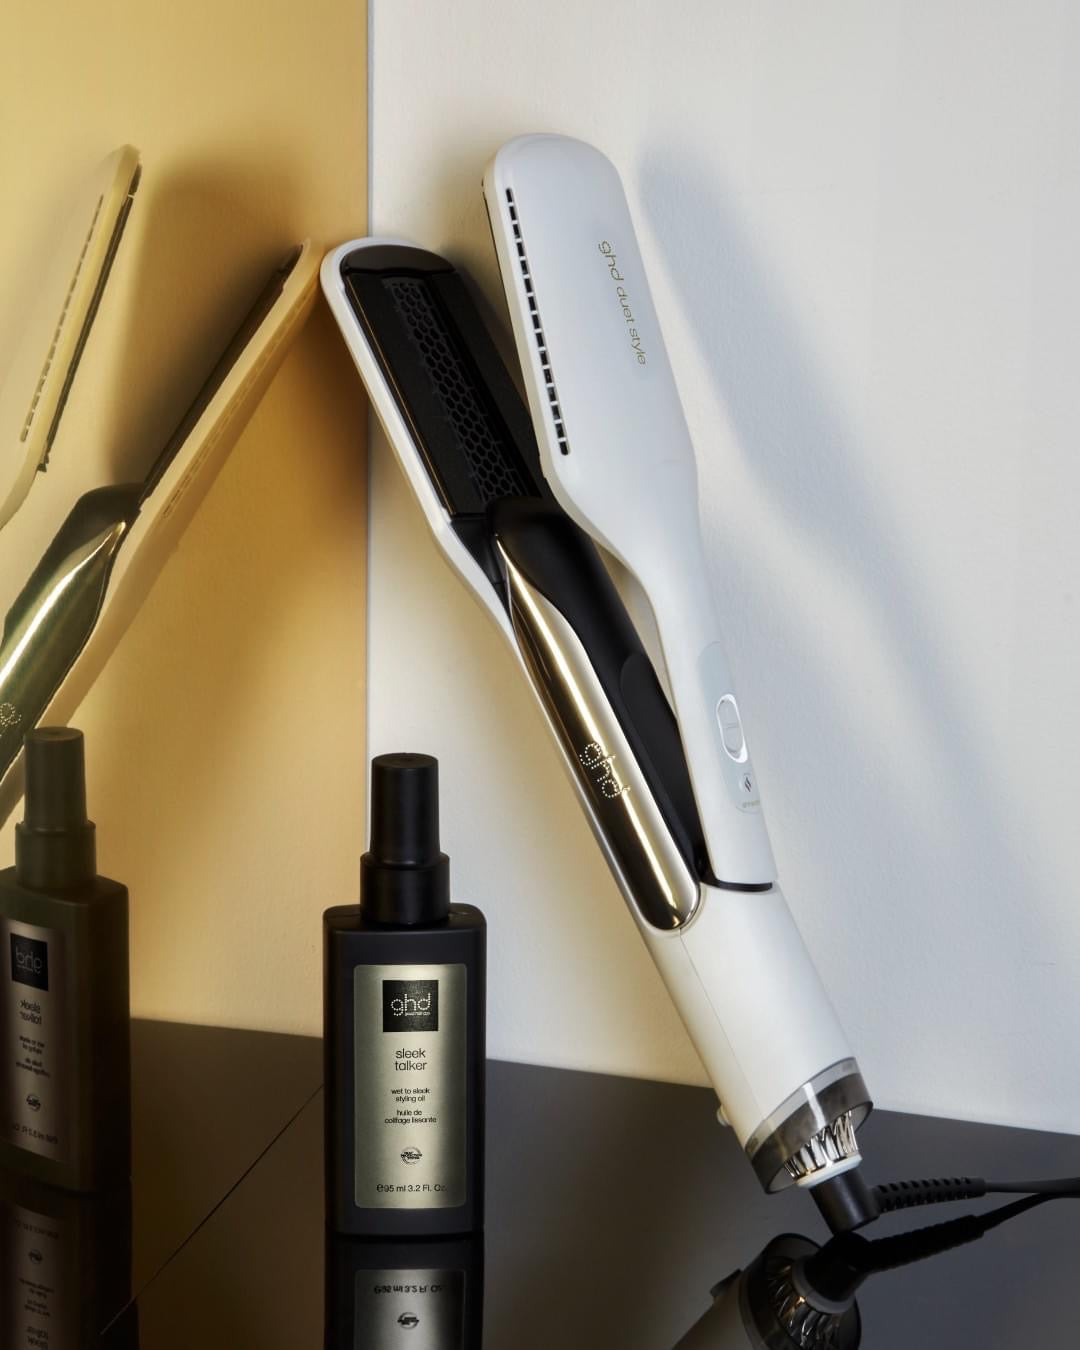 NEW Duet Stylers by ghd